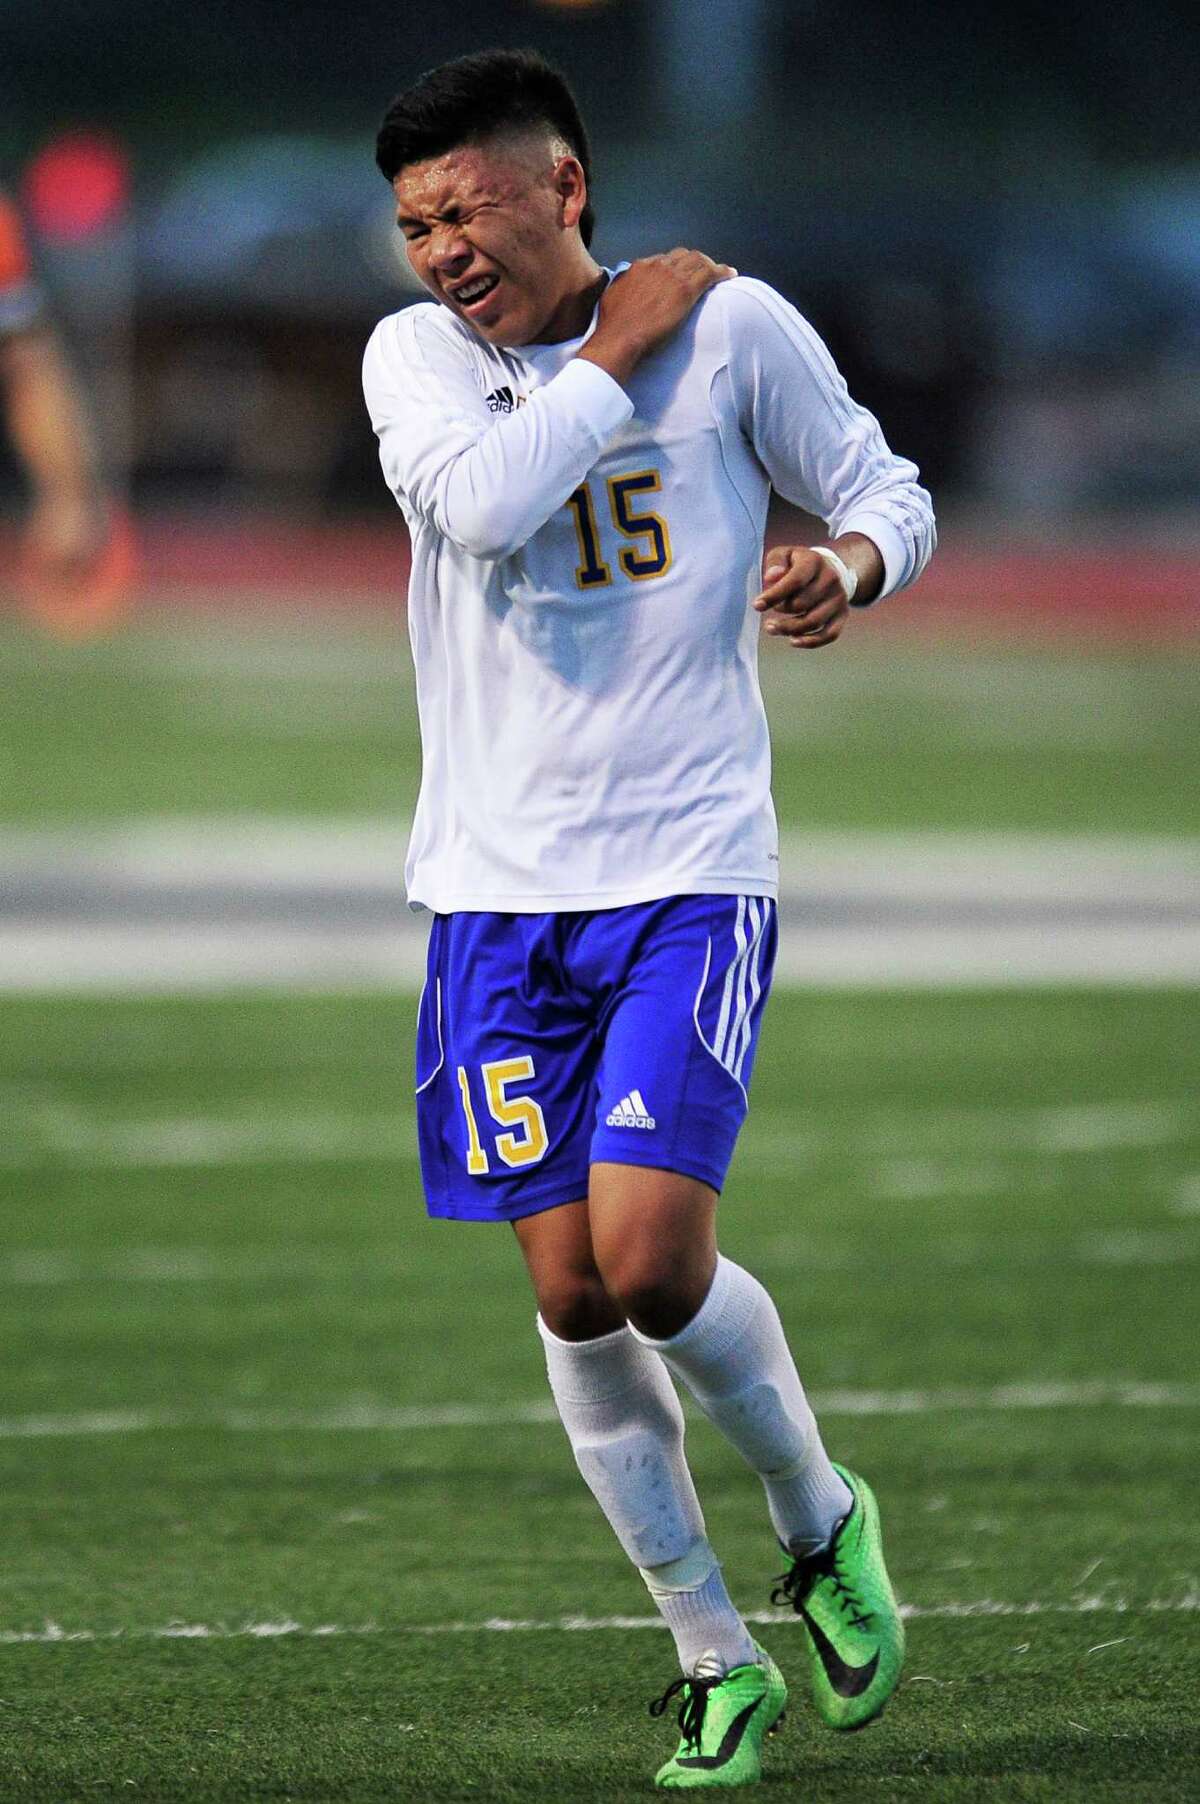 Clemens’s Michael Maldonado reacts after being kicked during the Class 6A third-round boys playoff game between Brandeis and Clemens on April 7, 2015 in San Antonio.